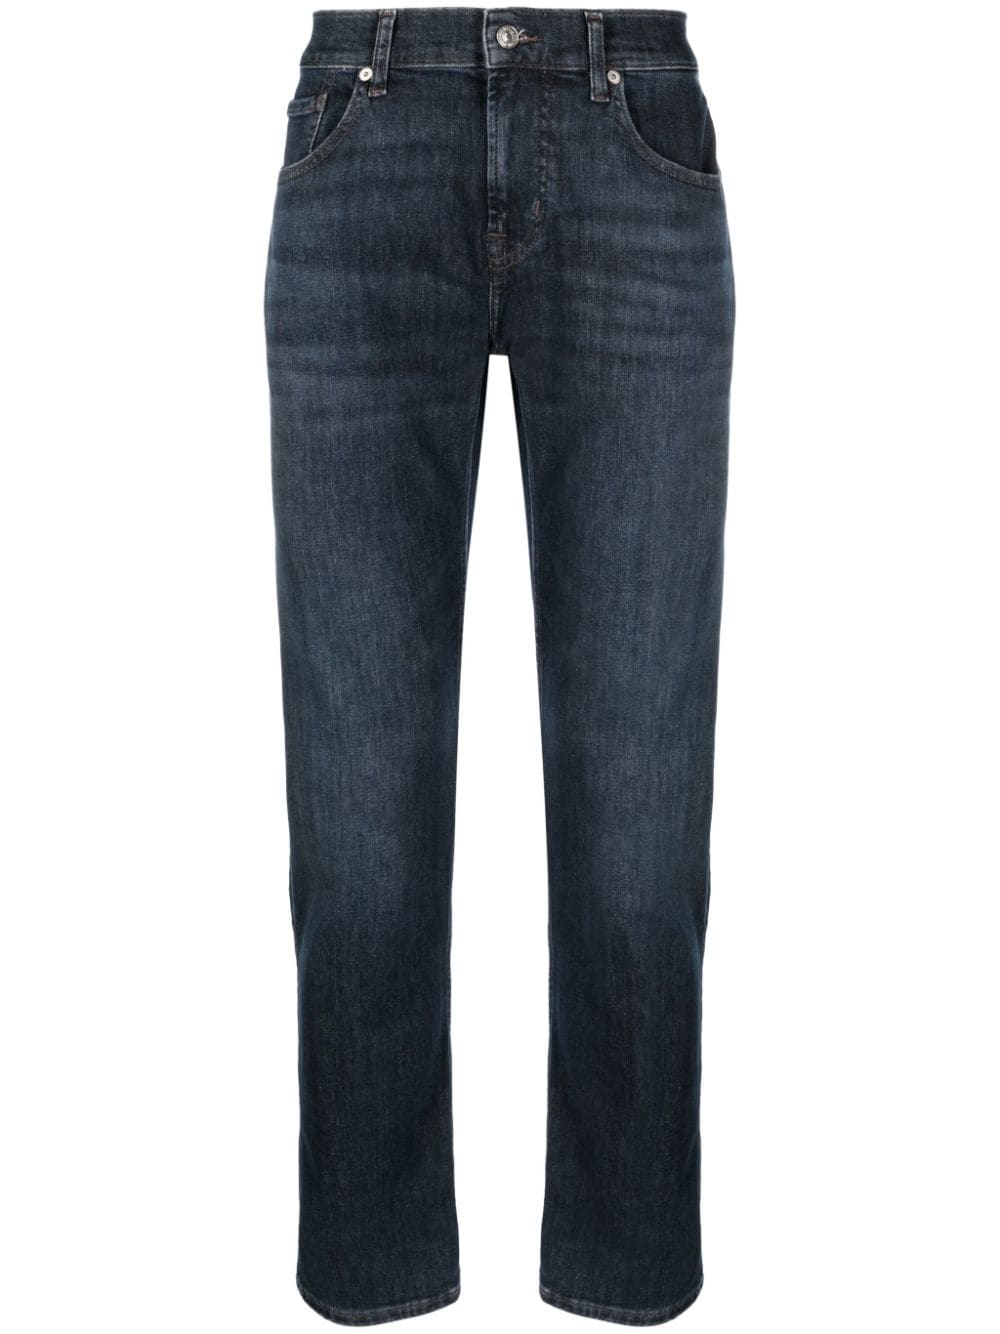 7 For All Mankind whiskering-effect tapered-leg jeans - Blue von 7 For All Mankind